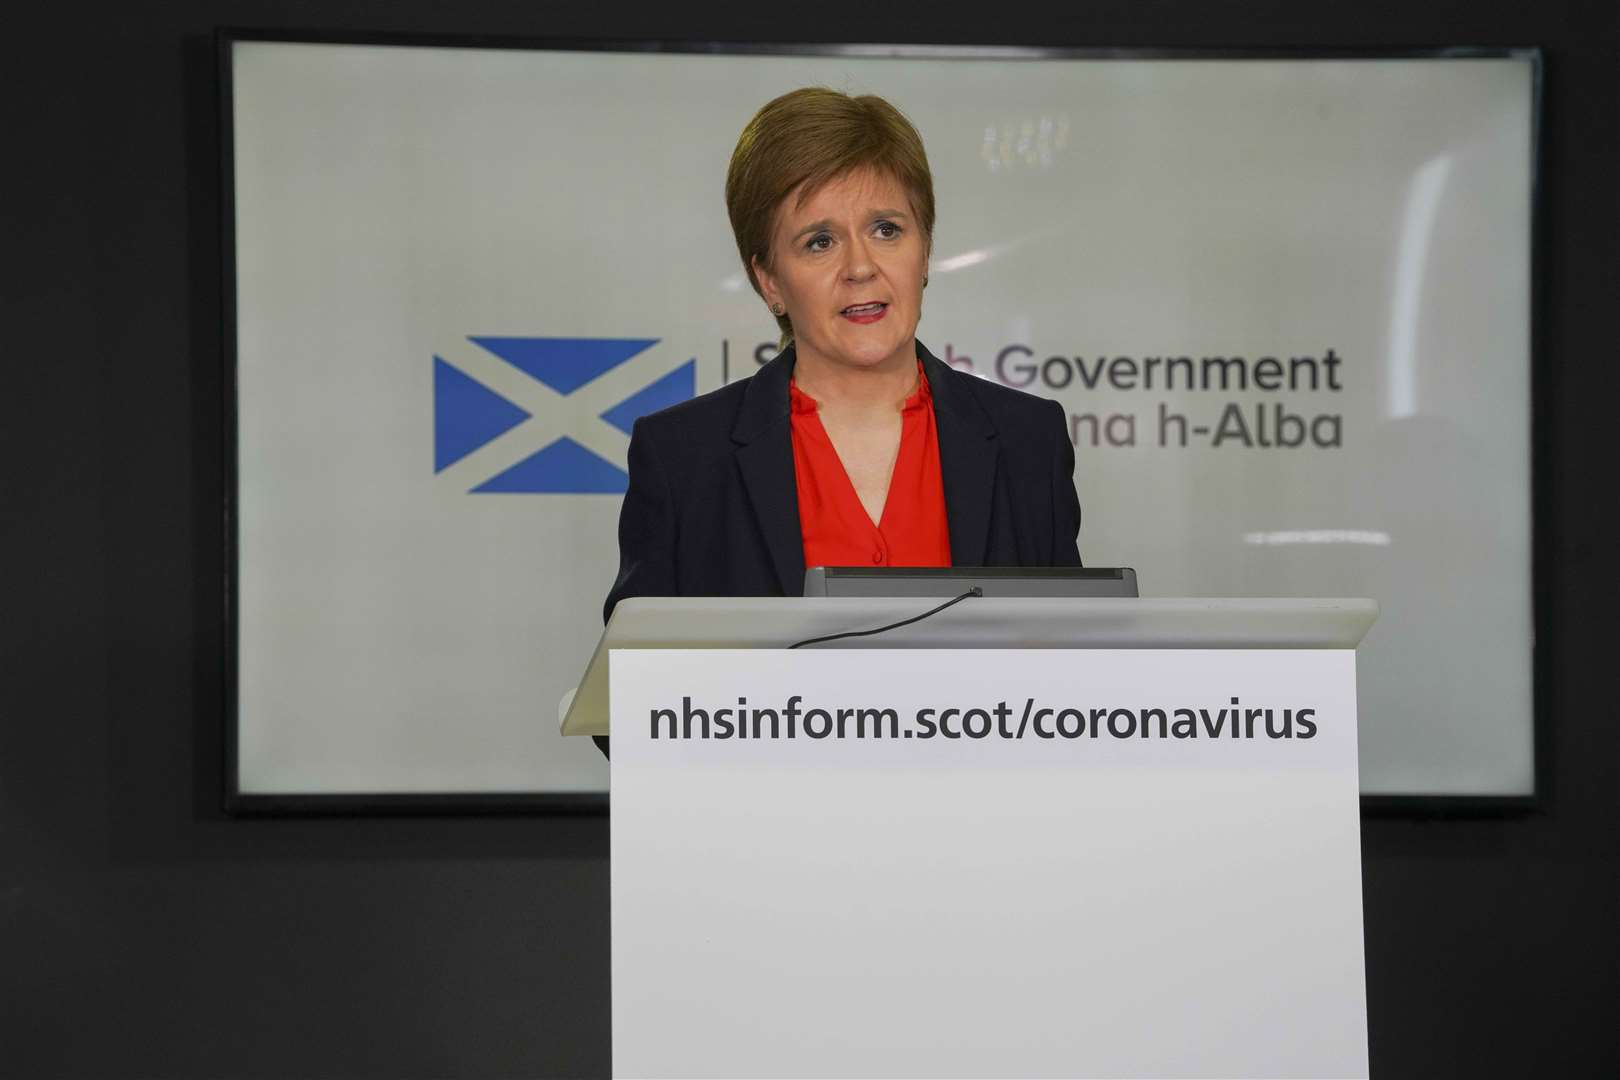 Nicola Sturgeon recommends face coverings in 'limited circumstances'